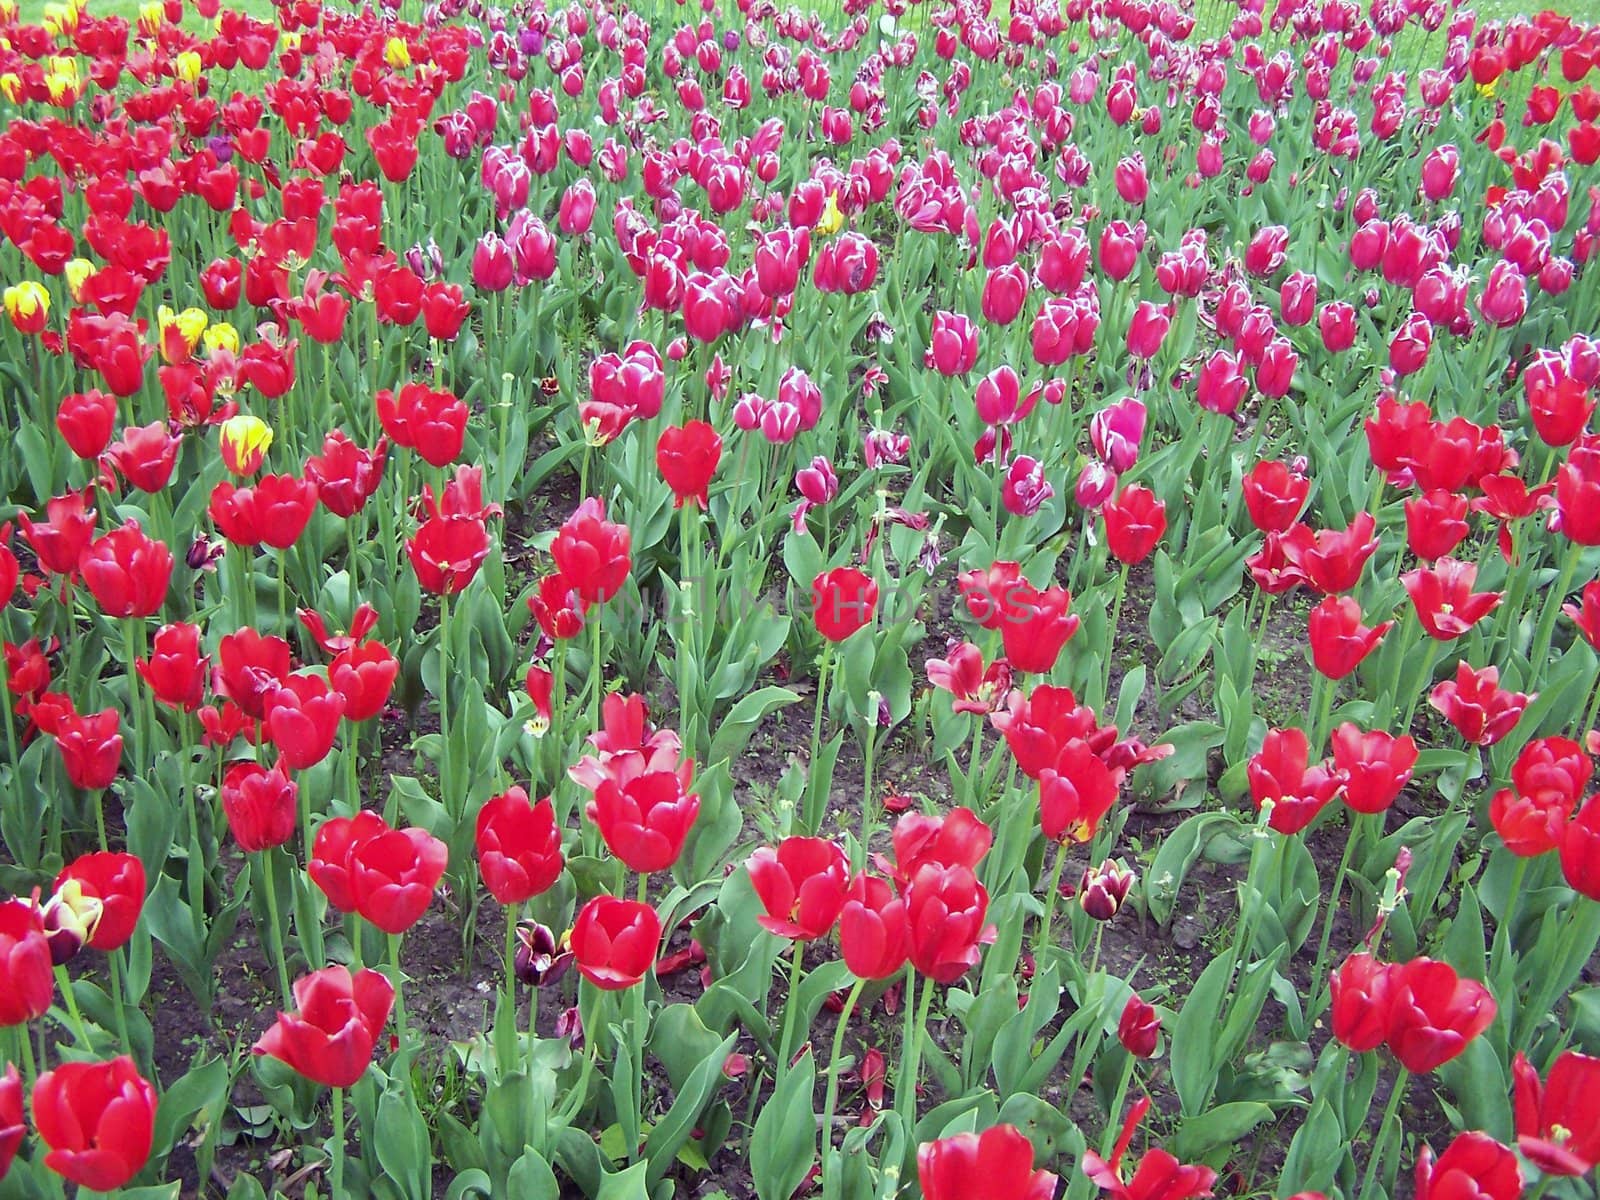 Many different tulips are blooming on the field.